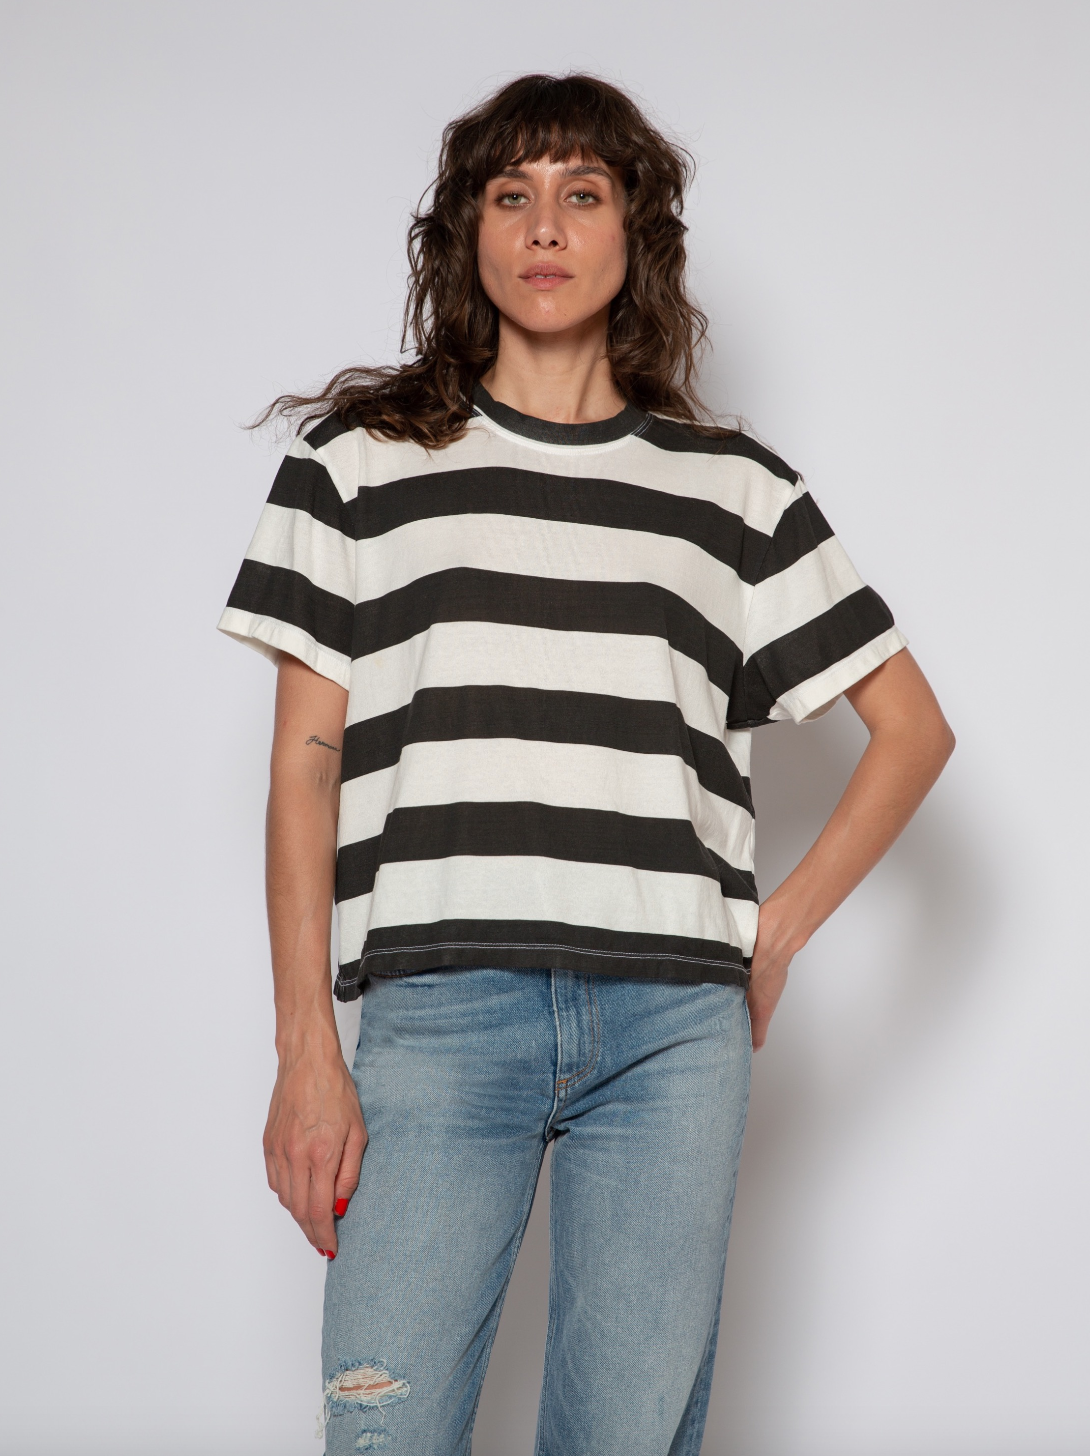 A woman with curly shoulder-length hair wearing a black and white striped boy tee from ASKK and blue jeans stands against a plain background in Scottsdale, Arizona, looking at the camera.